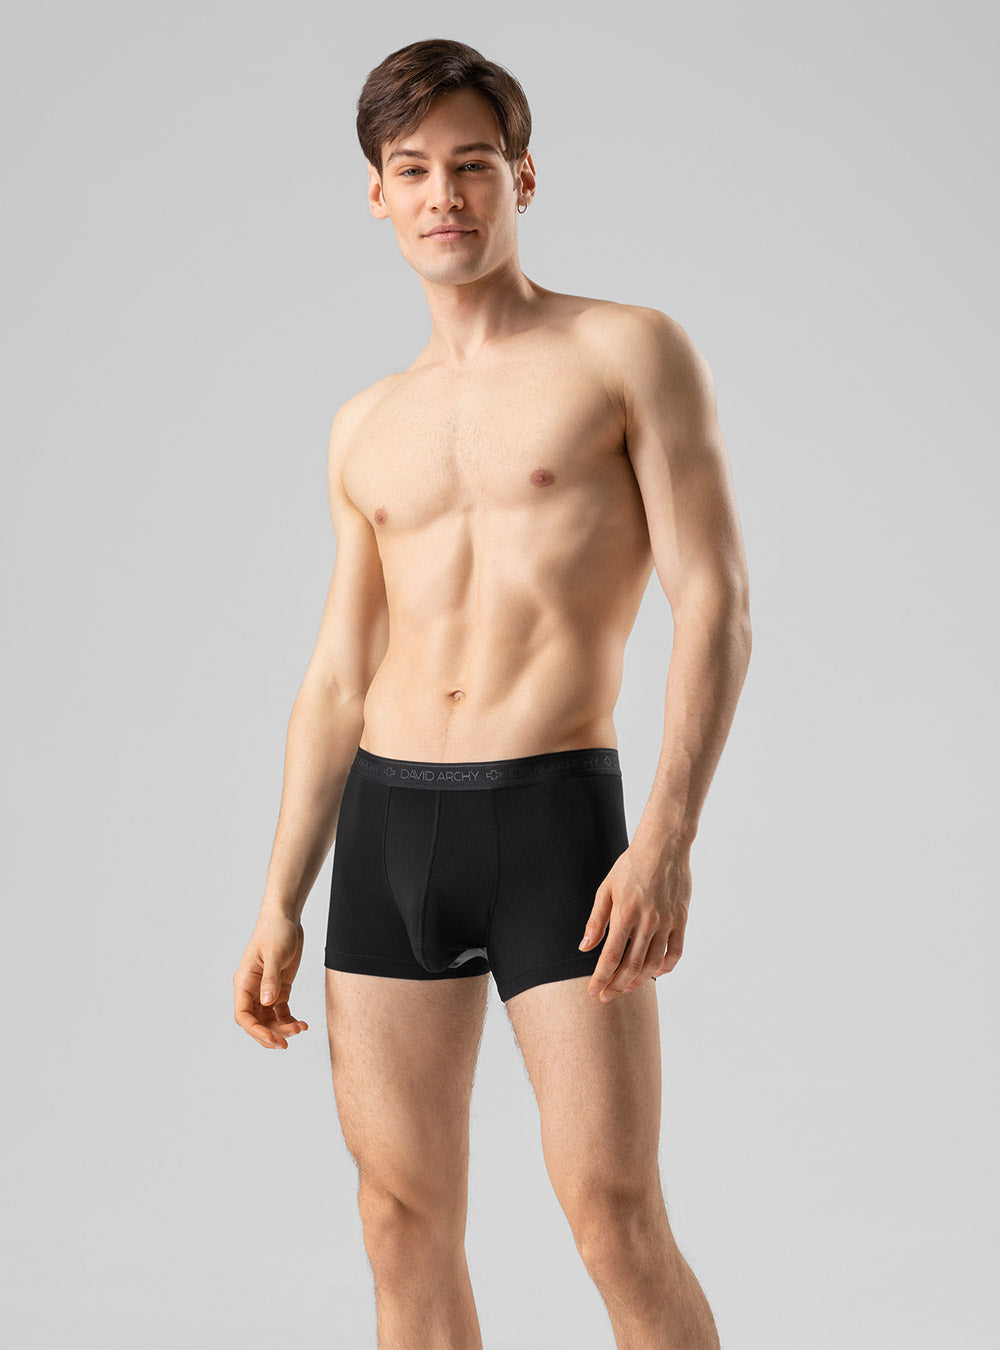 DAVID ARCHY Men's Dual Pouch Underwear - These are REALLY